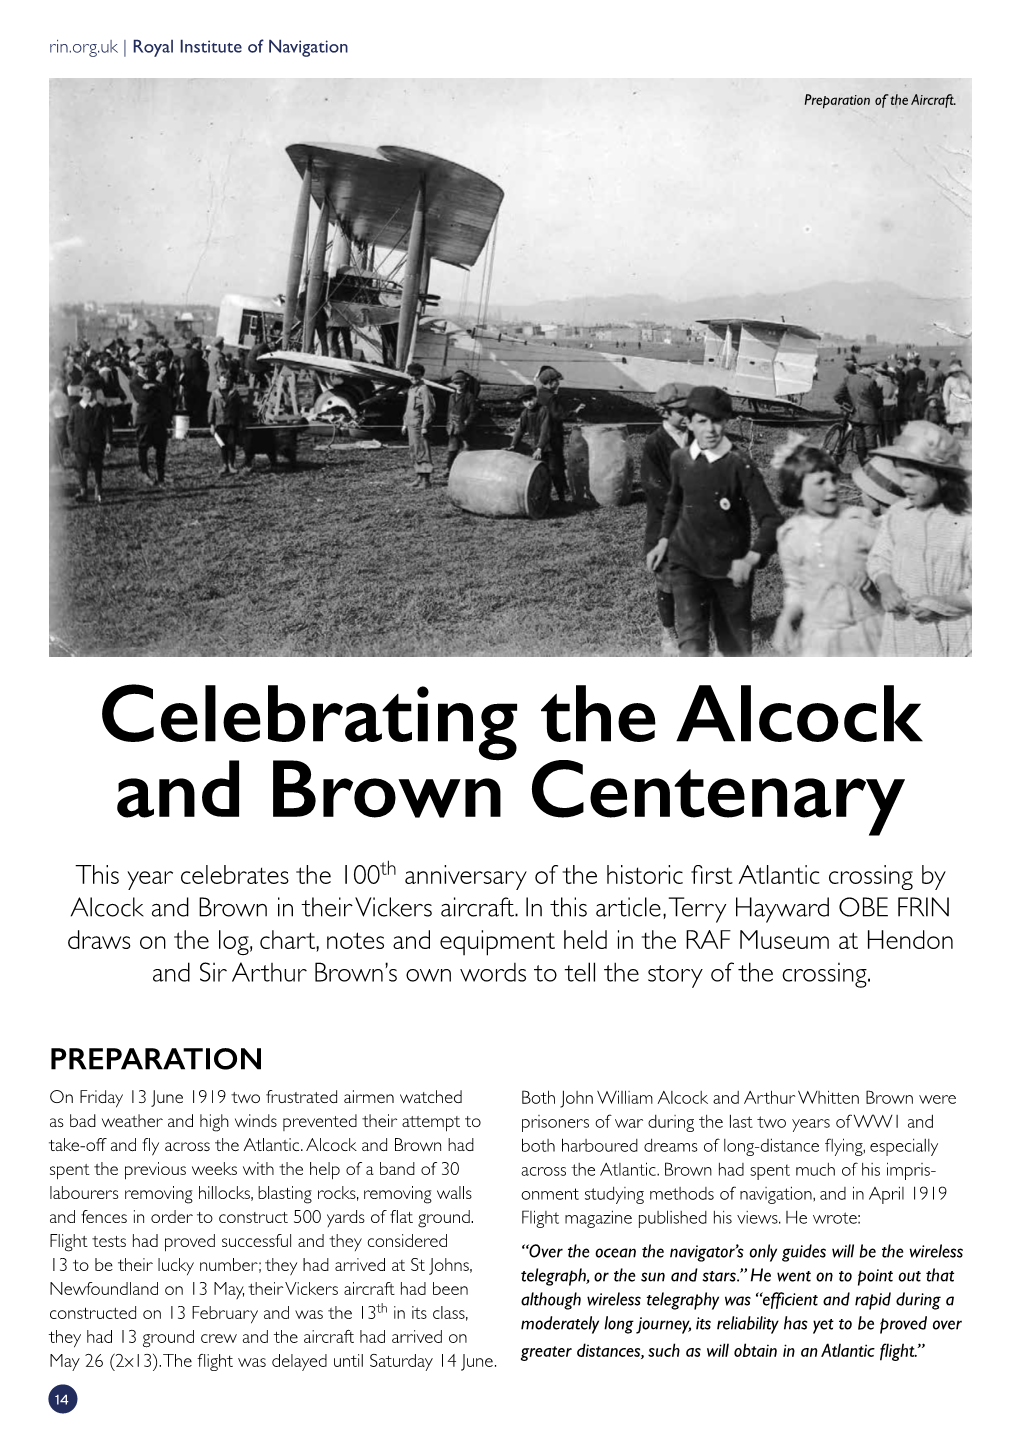 Celebrating the Alcock and Brown Centenary